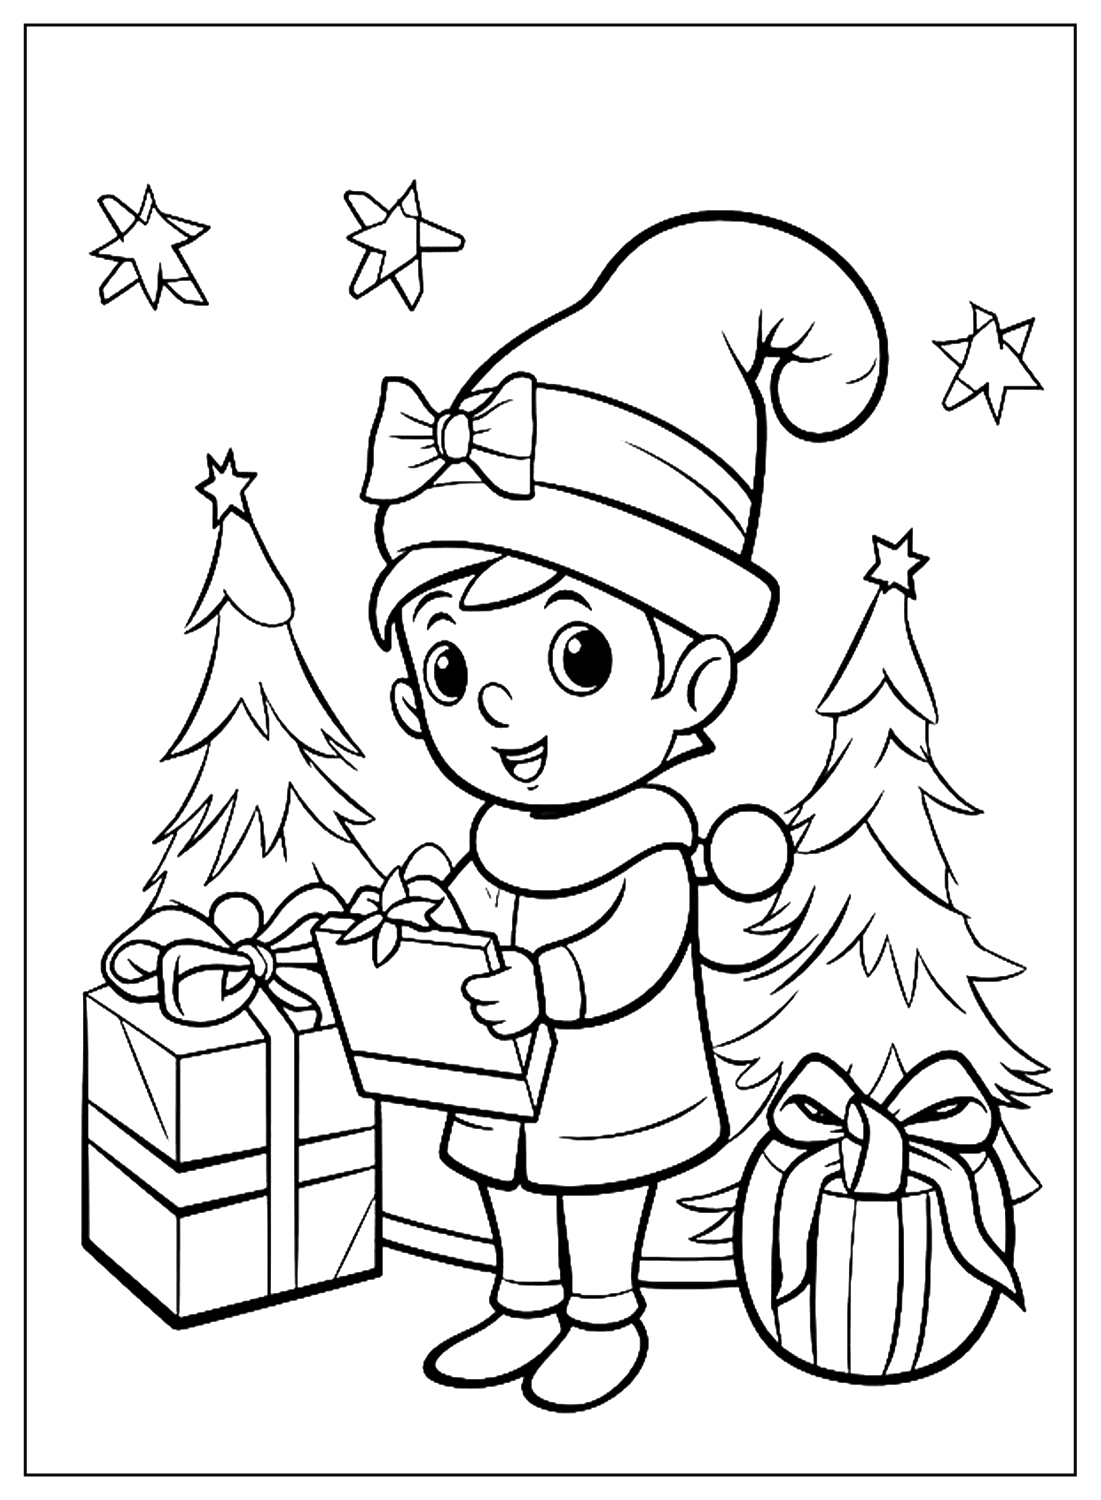 Elf Coloring Pages For Kids